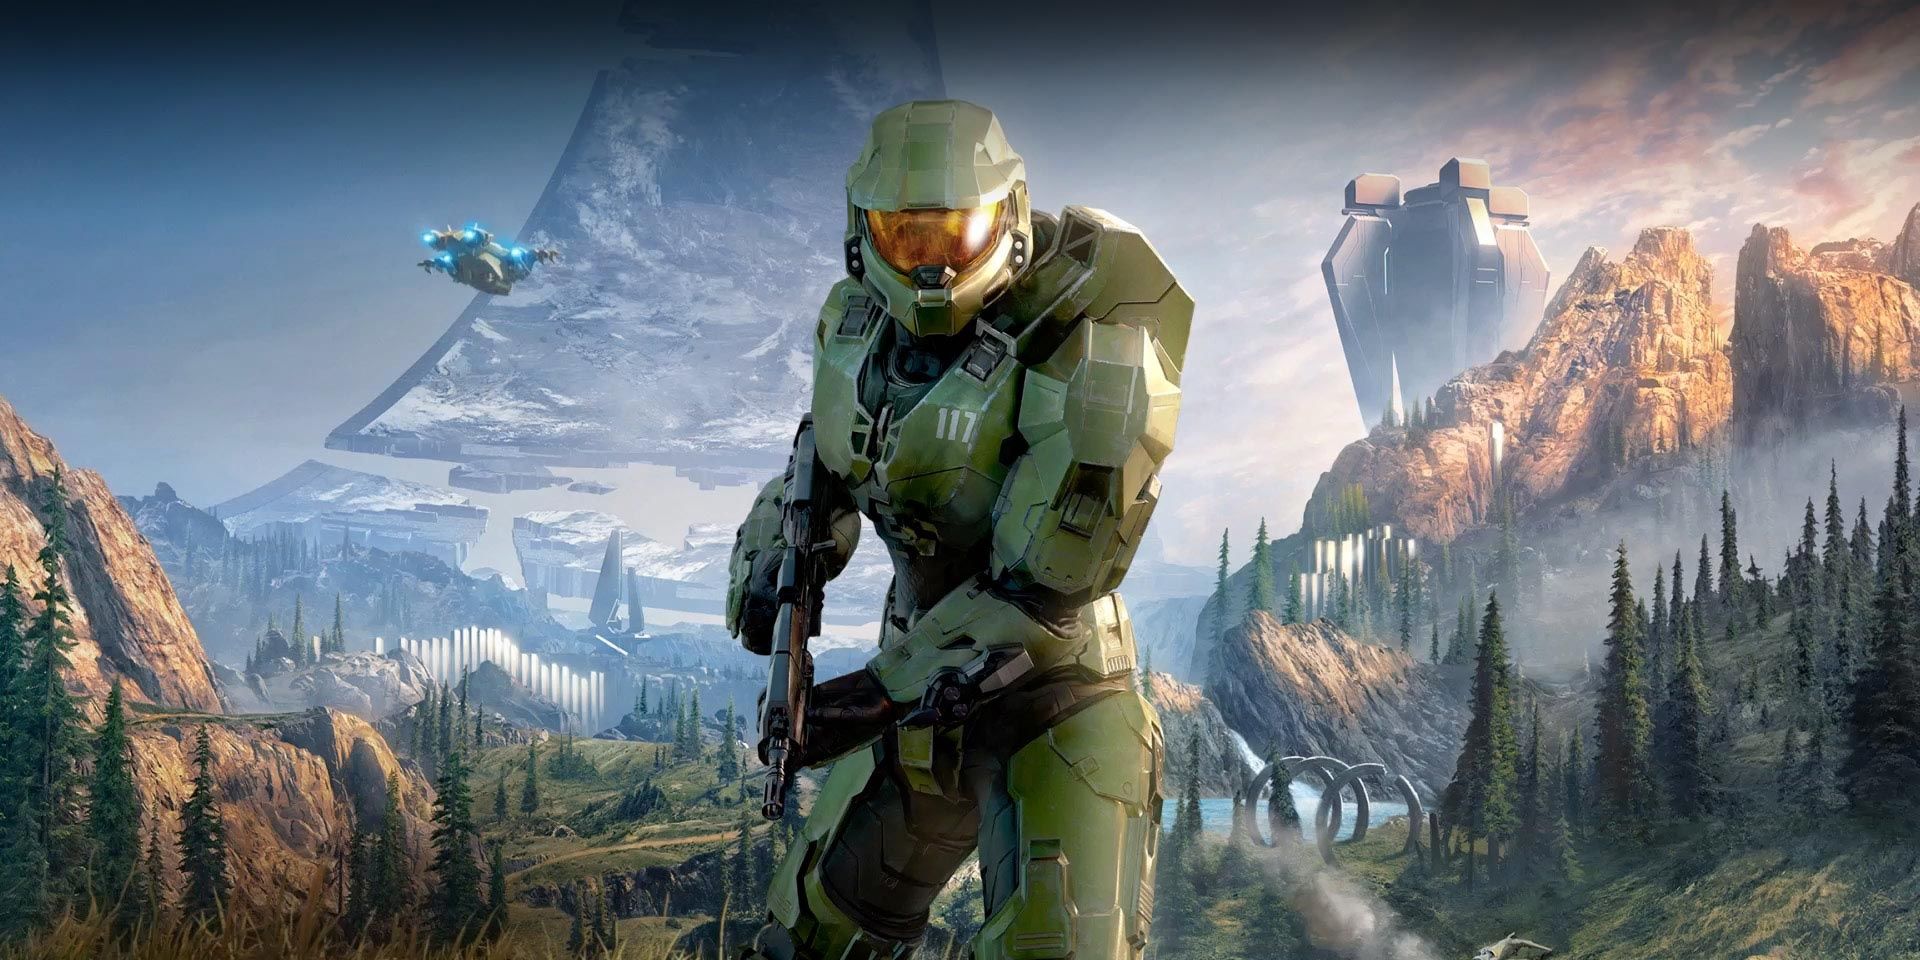 poster for Halo Infinite featuring Master Chief standing with a gun on a Halo ring